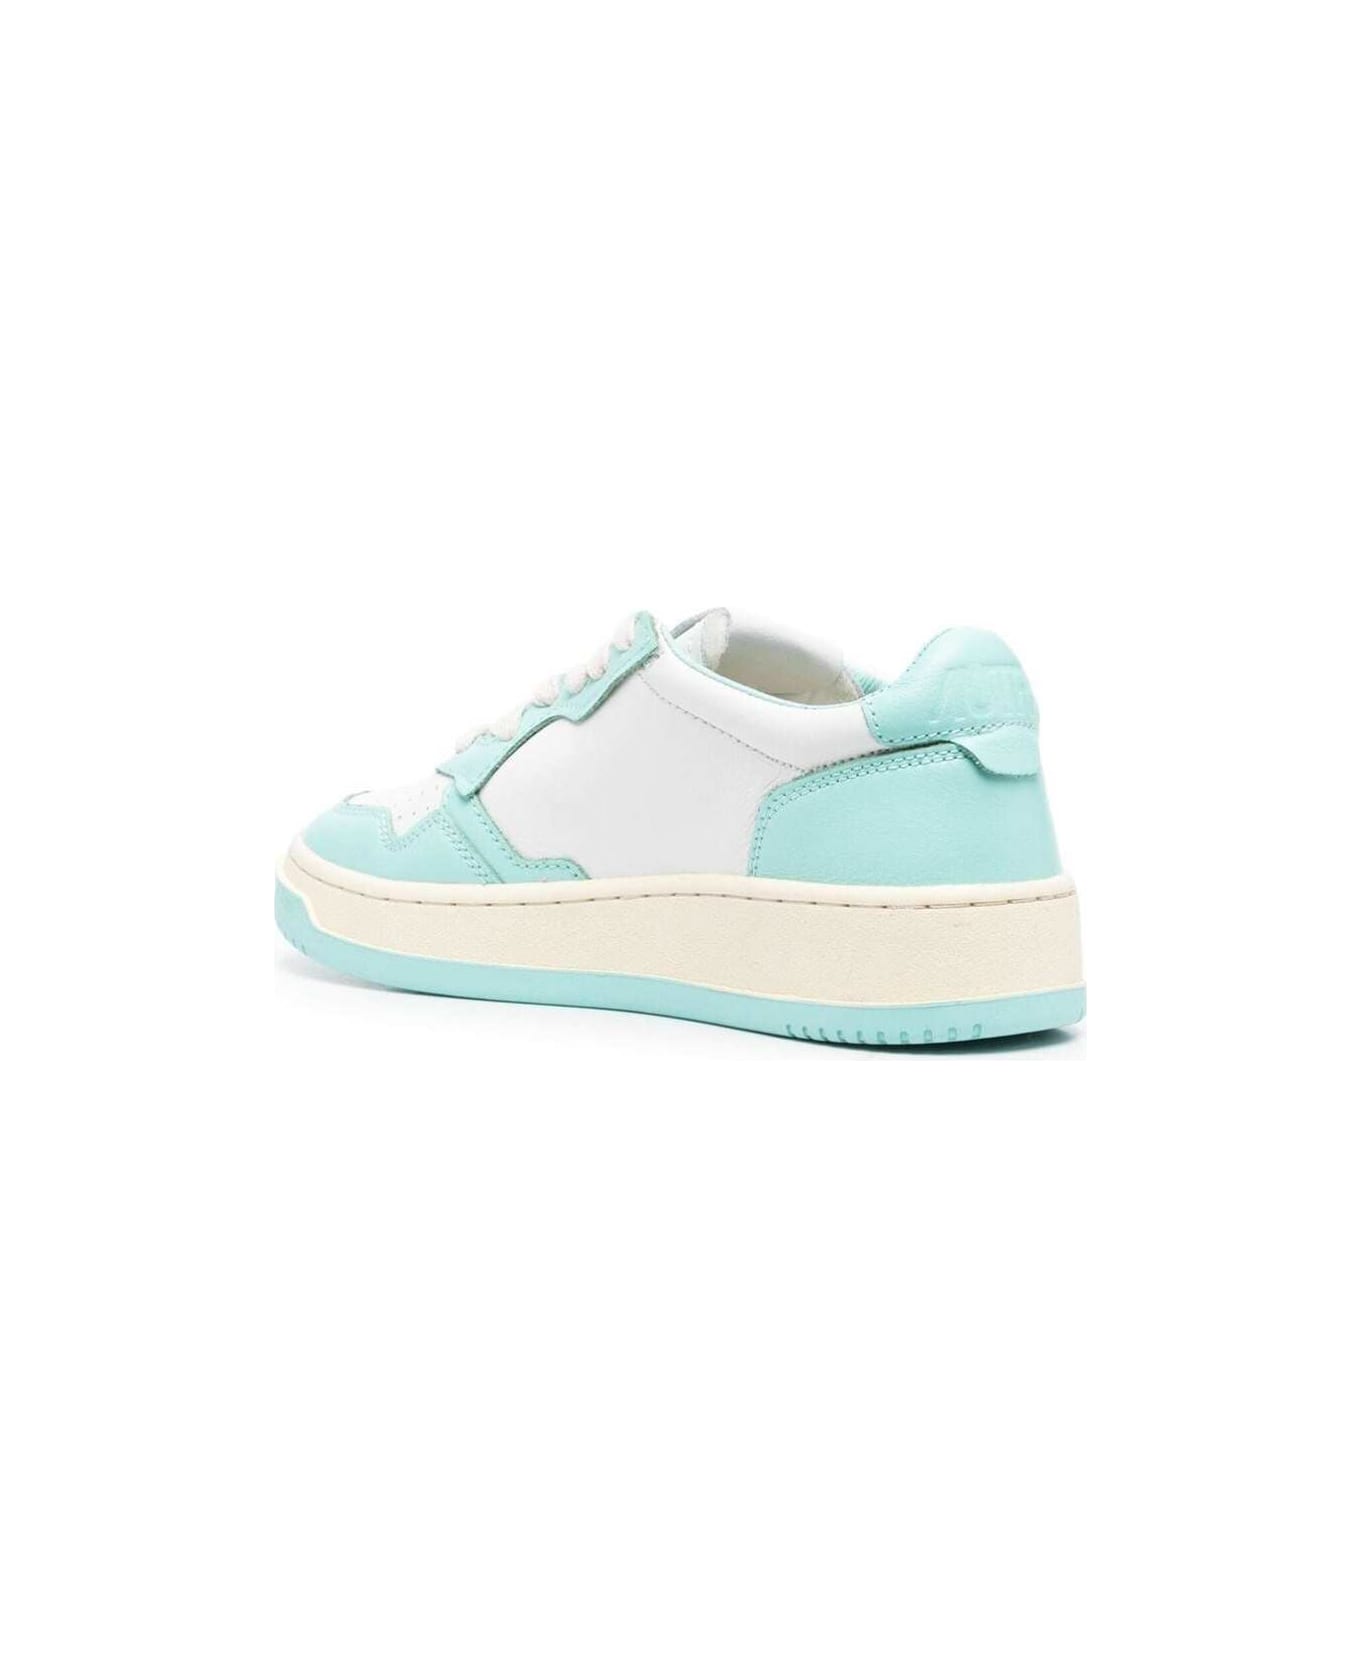 Autry Medalist Lace-up Sneakers - Leat Turquoise